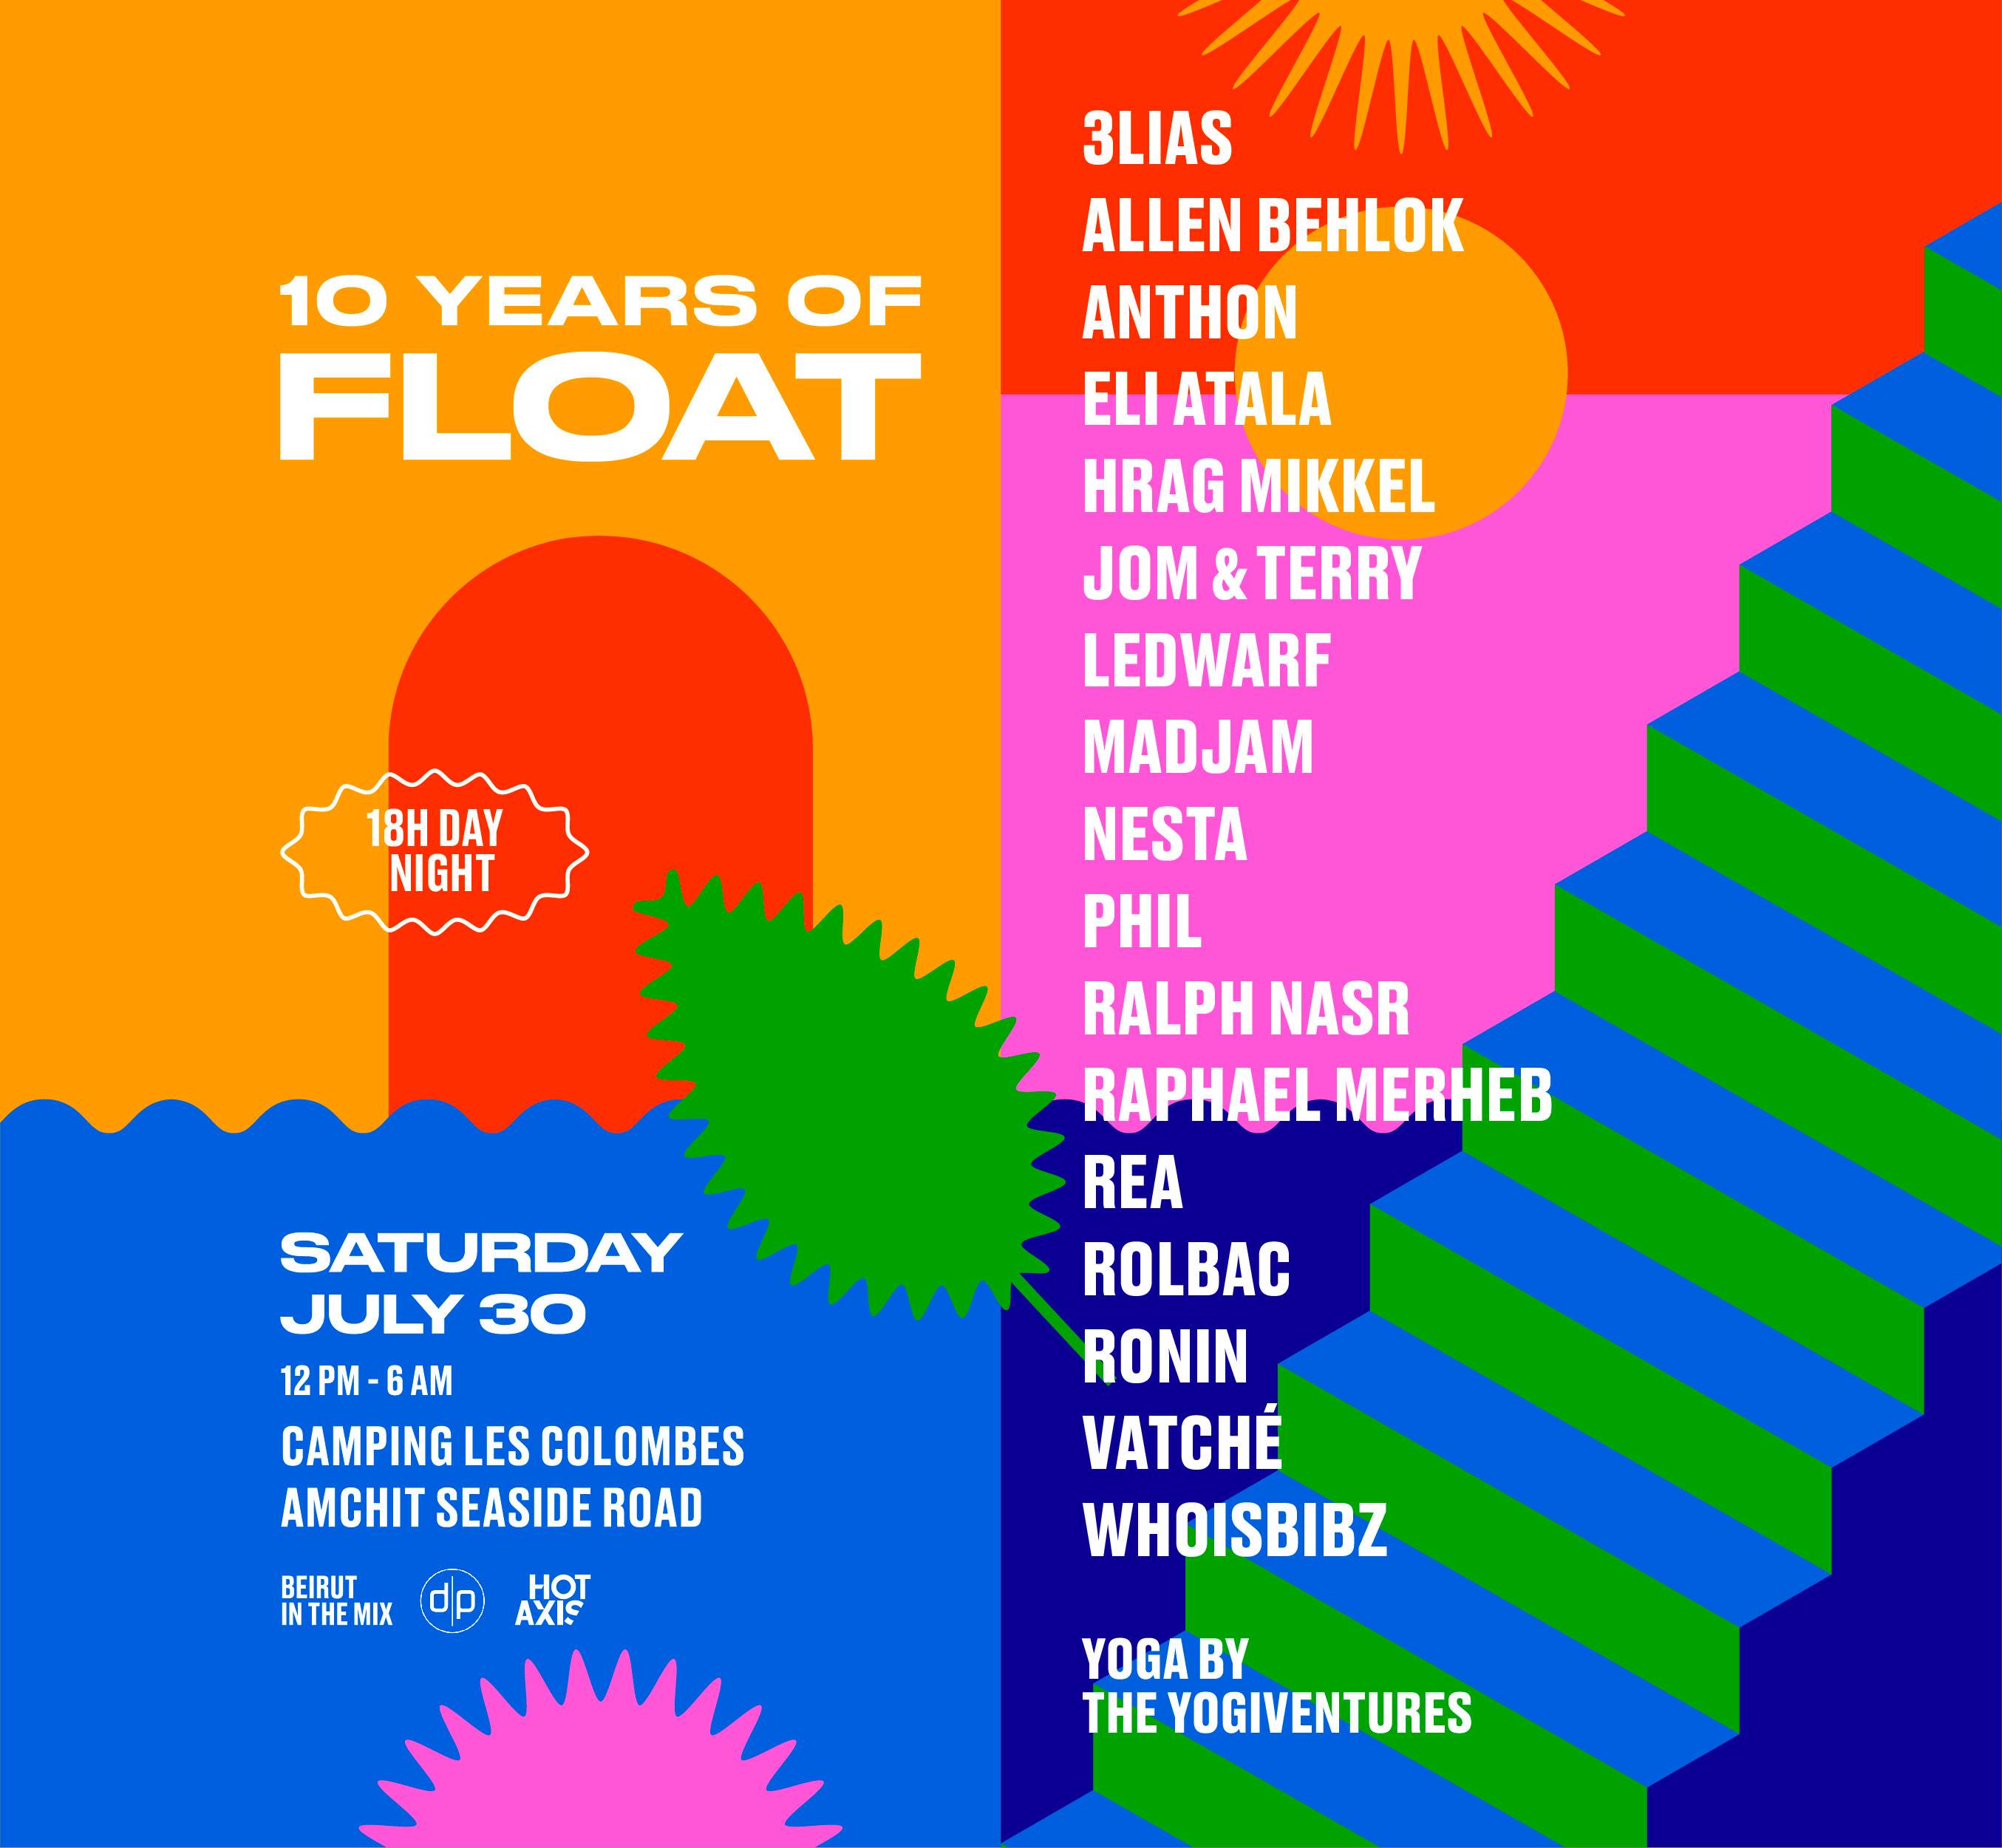 10 years of FLOAT Festival - フライヤー表